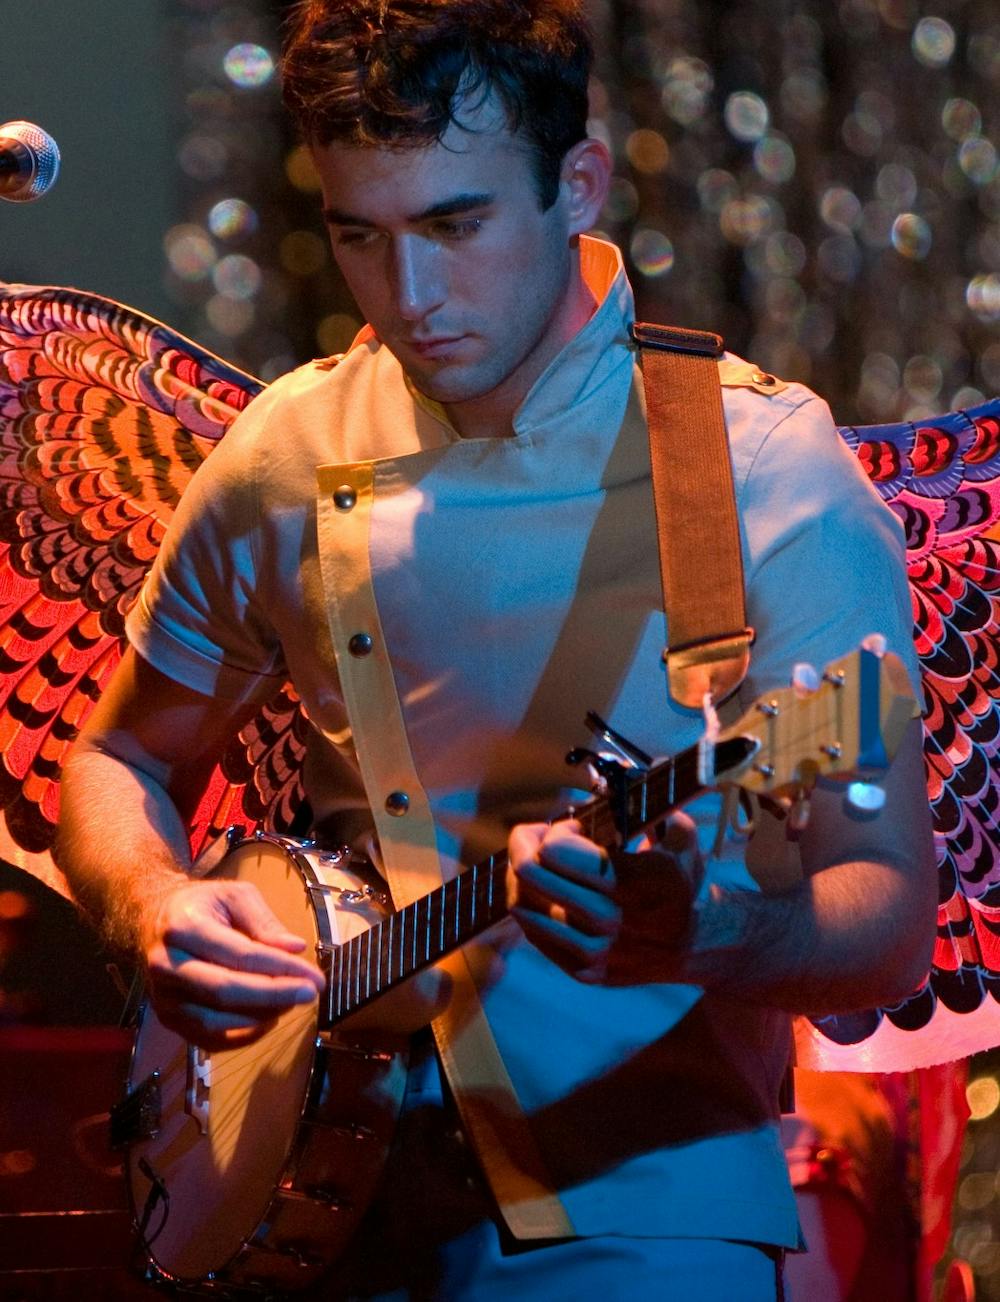 "The Ascension" is one of Sufjan Stevens’ most ambitious works yet, filled with nuance and challenging listeners to find meaning in it by looking inwards.